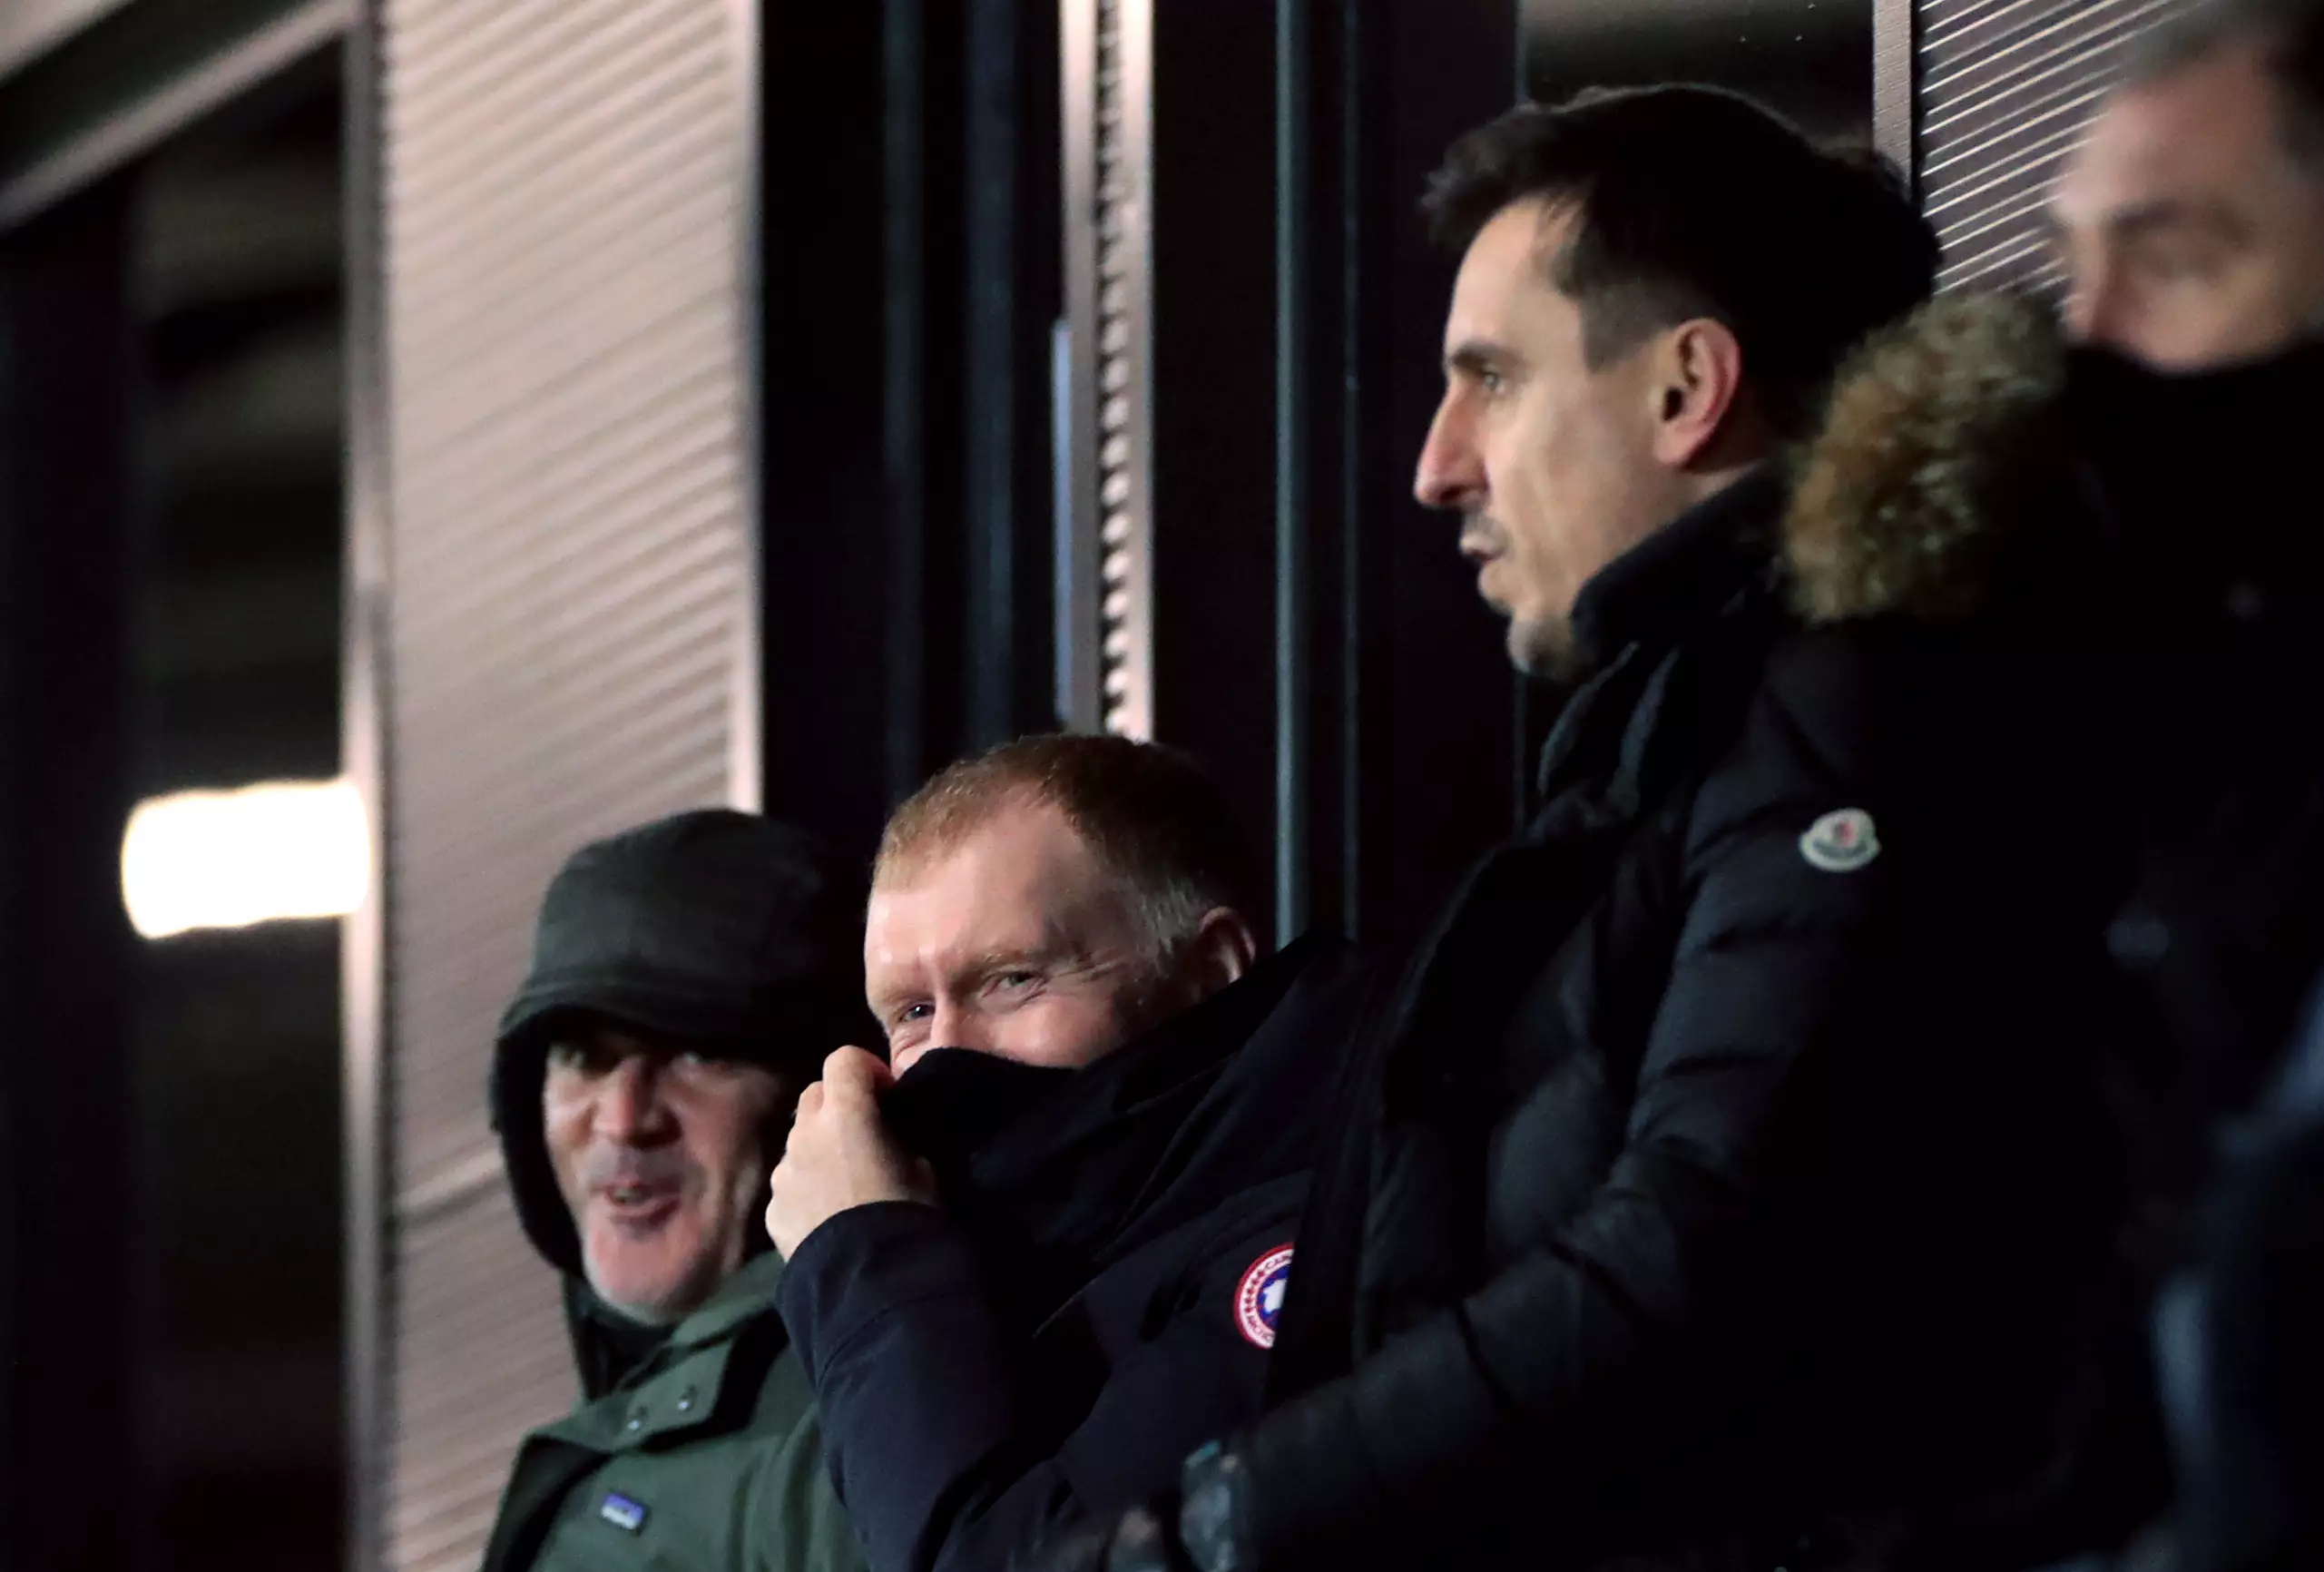 Neville and co-owner Paul Scholes watch their team. Image: PA Images